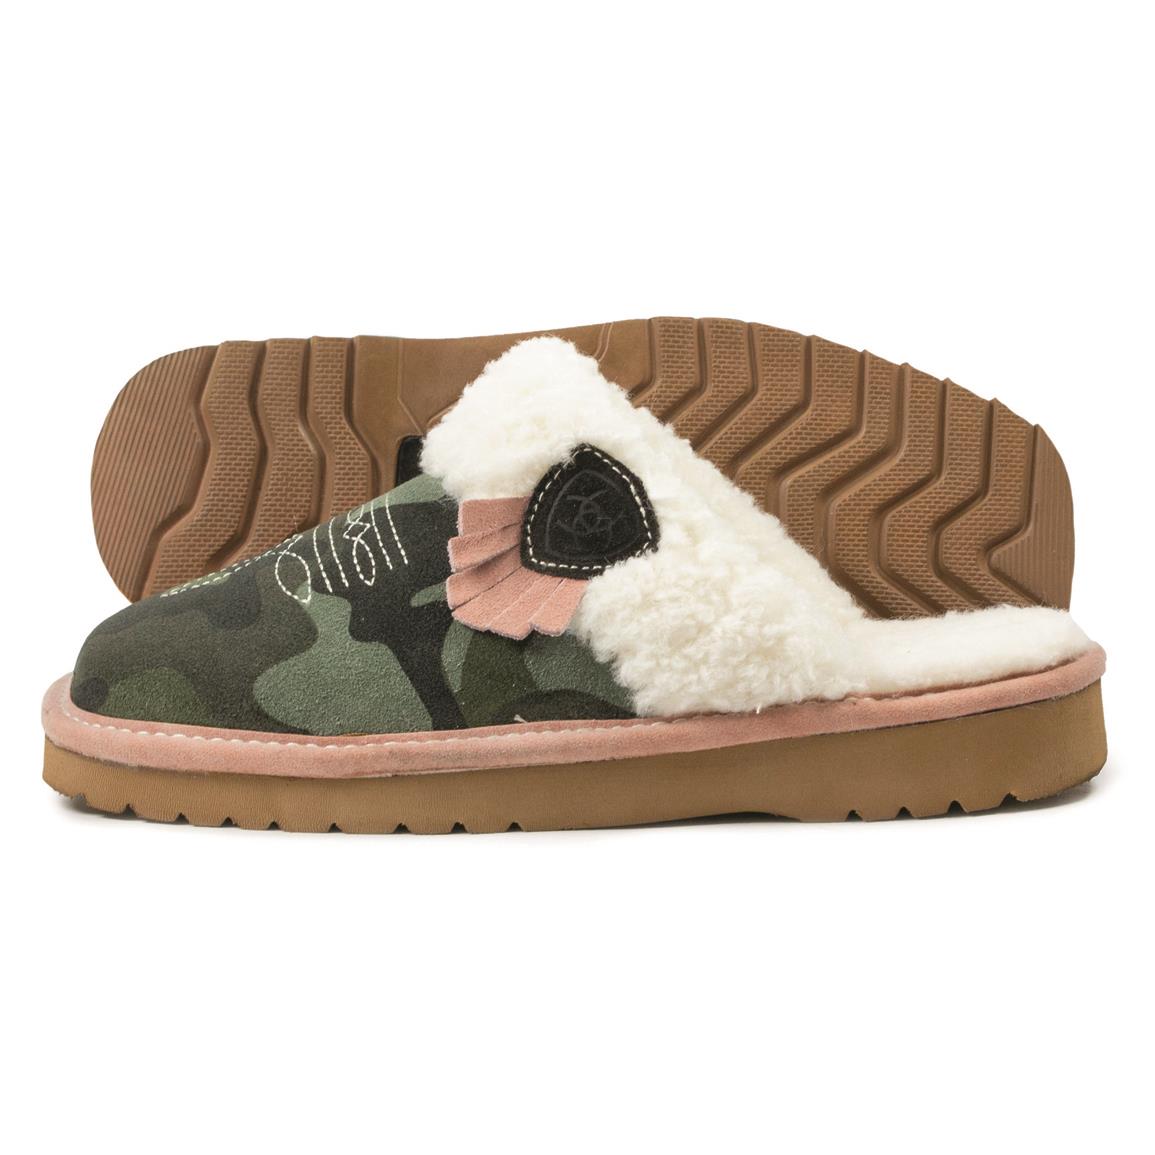 Ariat Women's Jackie Exotic Square Toe Slippers, Camo